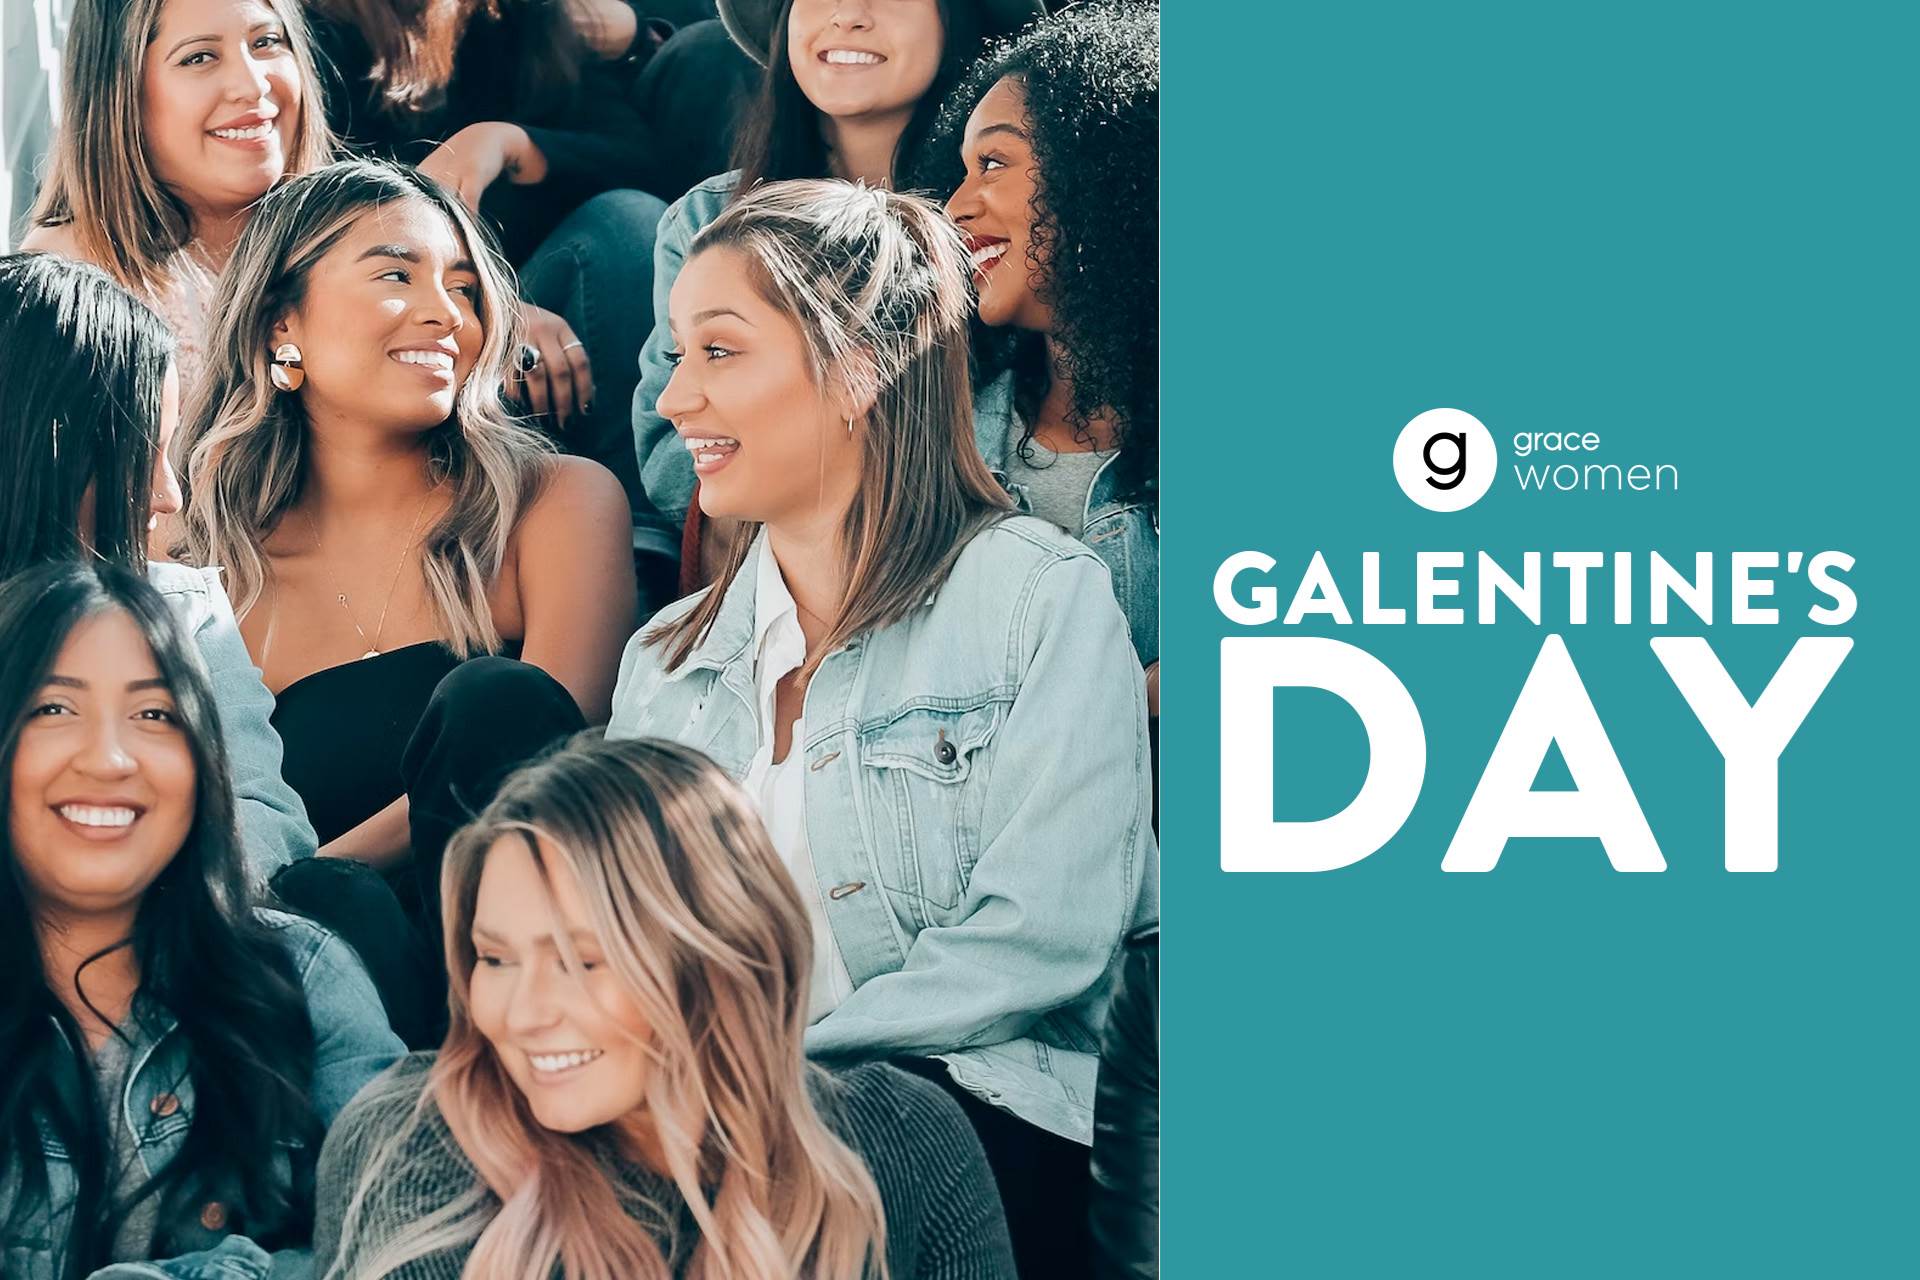 Link to Galentine's Day detail page